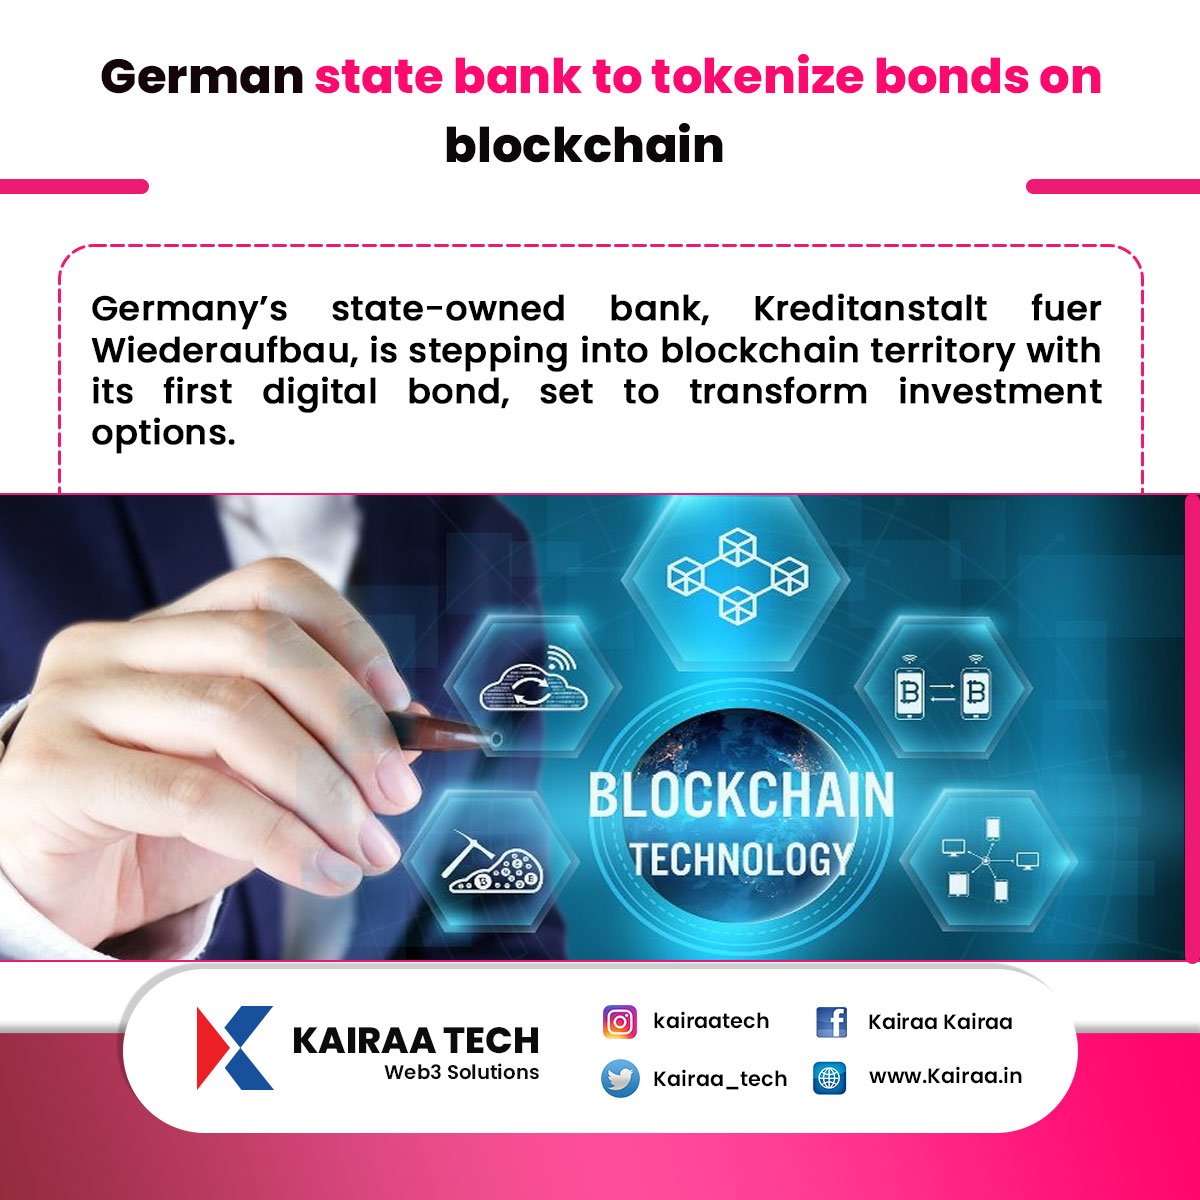 German state bank plans to tokenize bonds on blockchain.
For more details and updates.
Website: kairaa.in
Mail Id: Support@kairaatechserve.com
#kairaa #techserve #german #bond #blockchain #crypto #plan #cryptocurrency #usdc #technology #follow #like #socialmedia